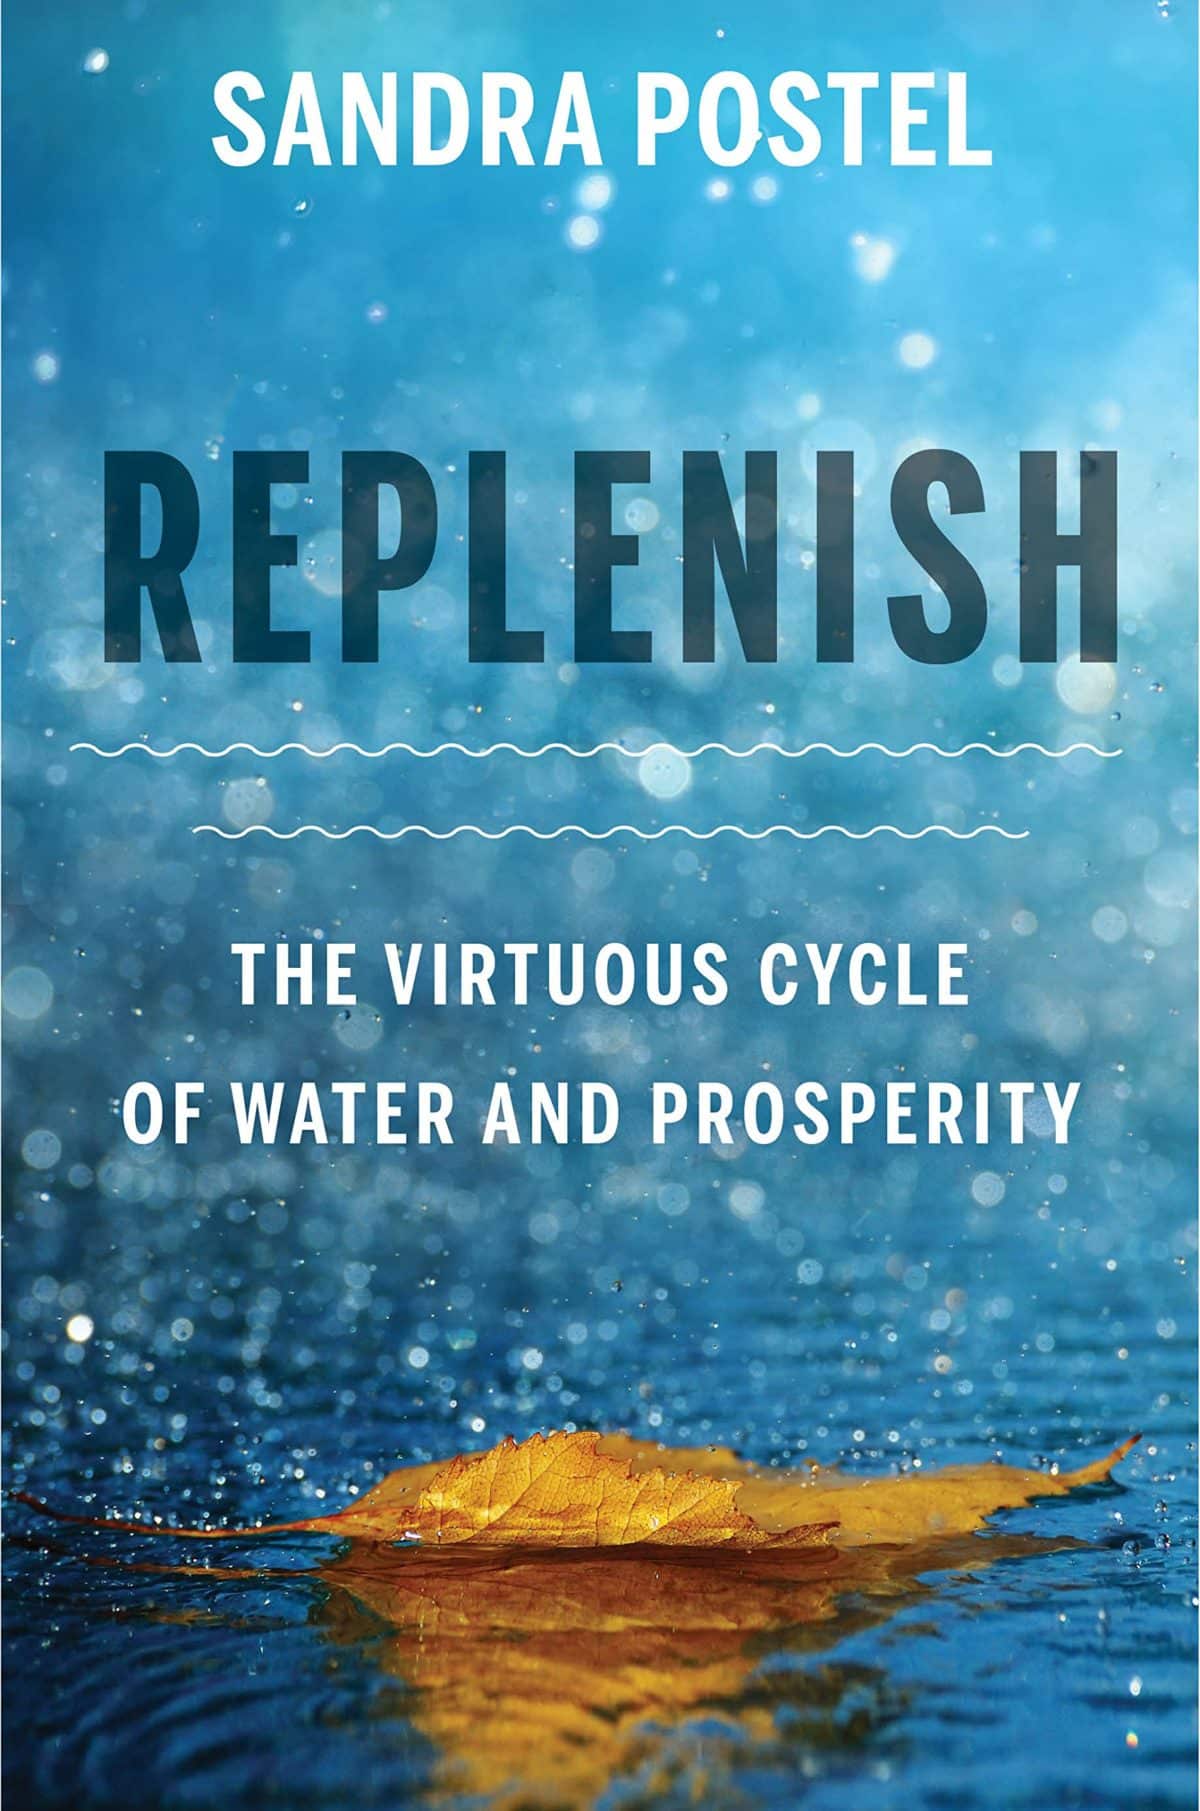 Replenish the virtuous cycle of water and prosperity